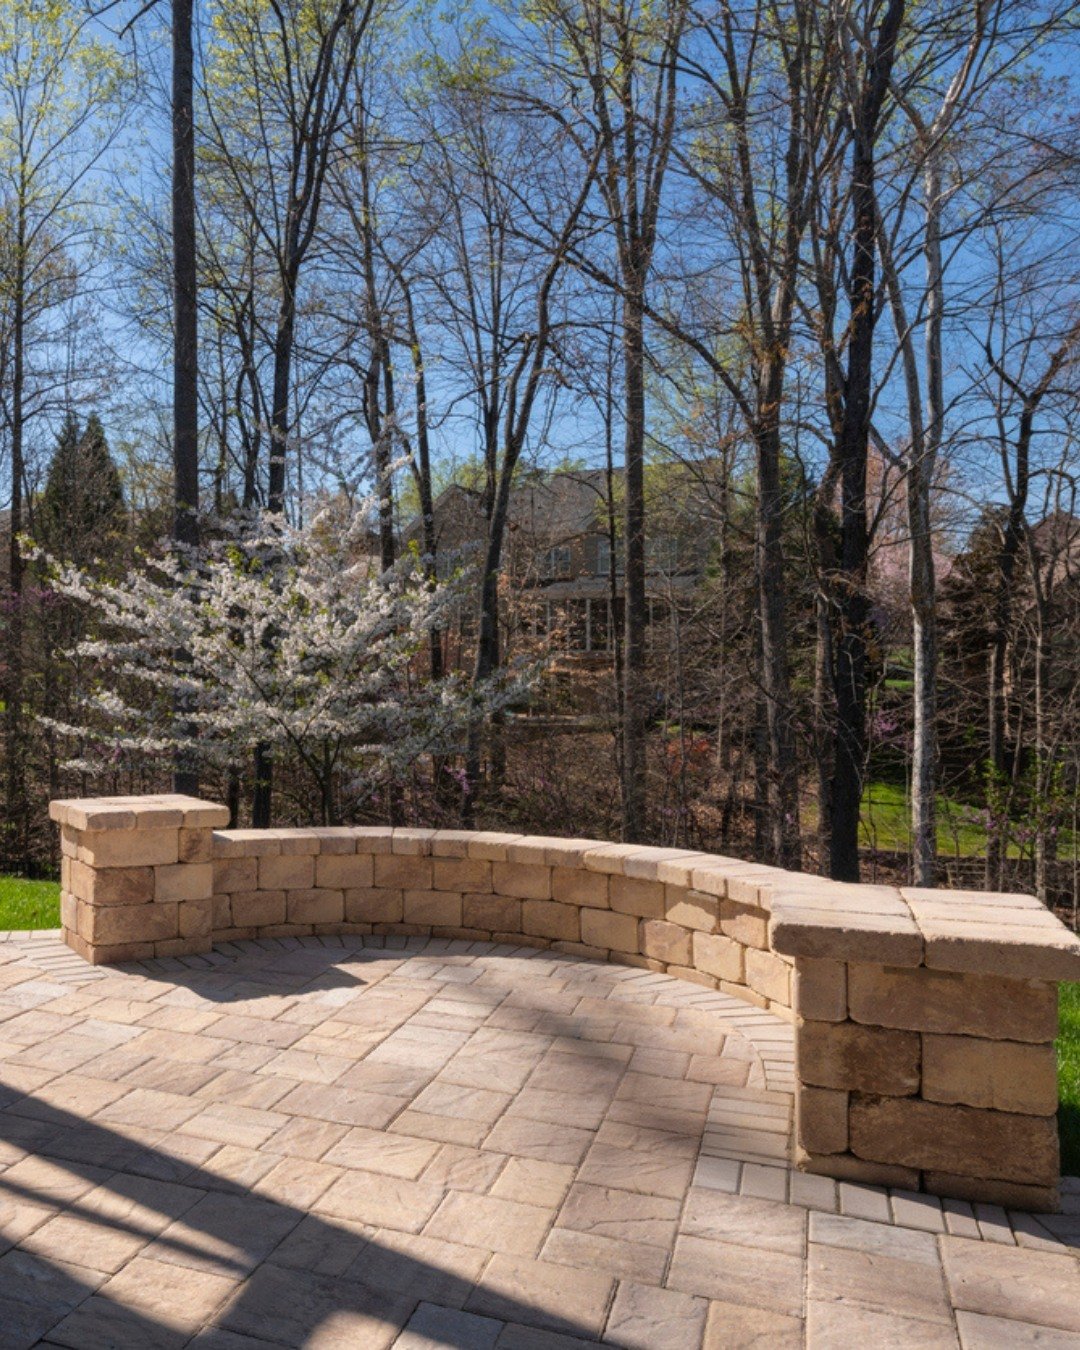 Wall? Space defining structure? Outdoor seating? Functional design serving more than one purpose with zero maintenance is the absolute GOAT of home improvement. #patiodesign #paverdesign #nashvillelandscape #landscapecompany